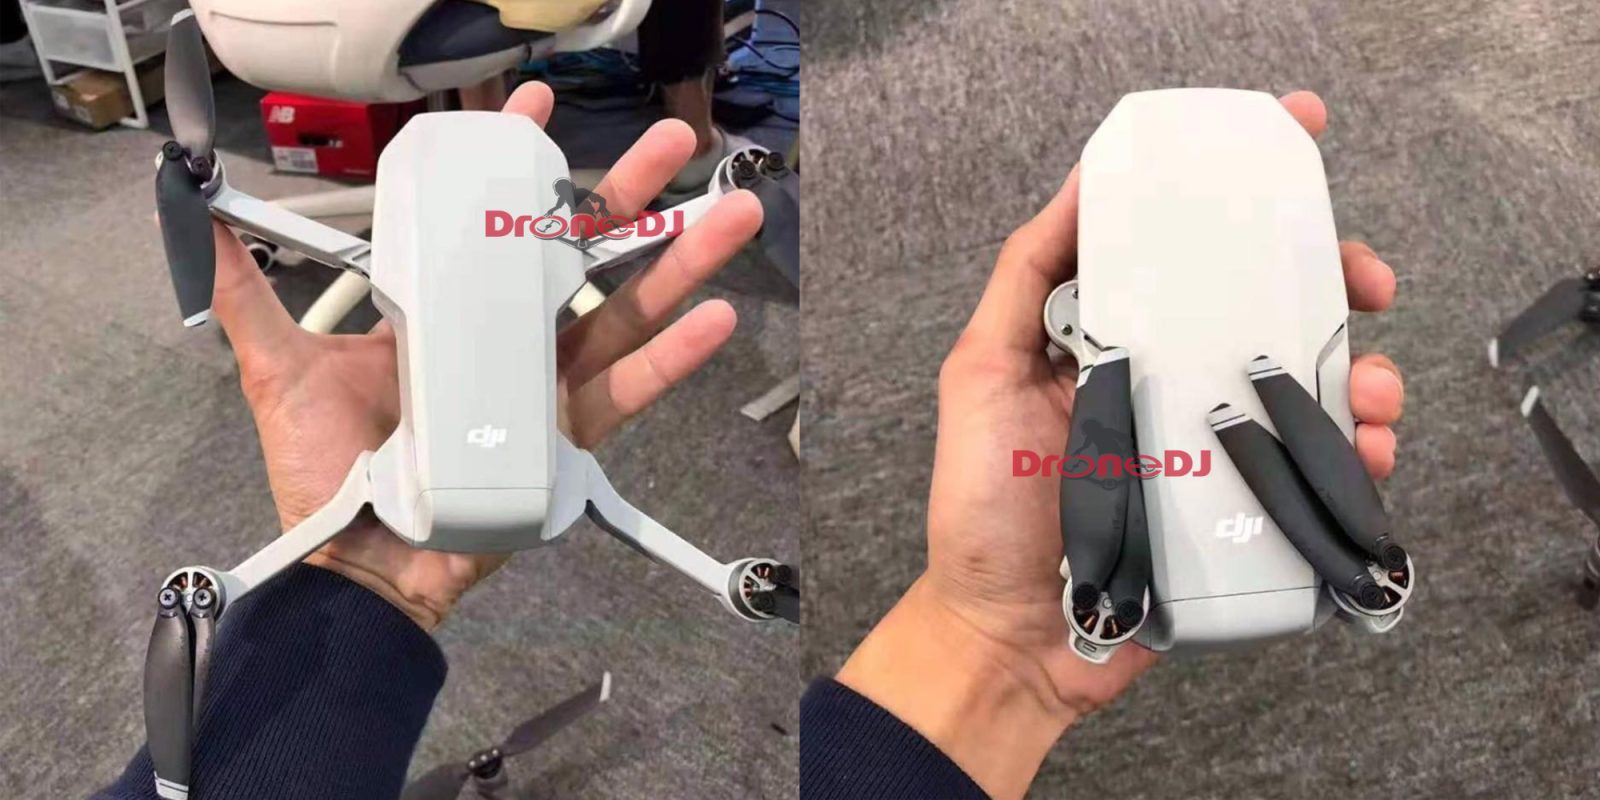 DJI Mavic Mini: new photos and updated specs for palm-sized drone | DJI